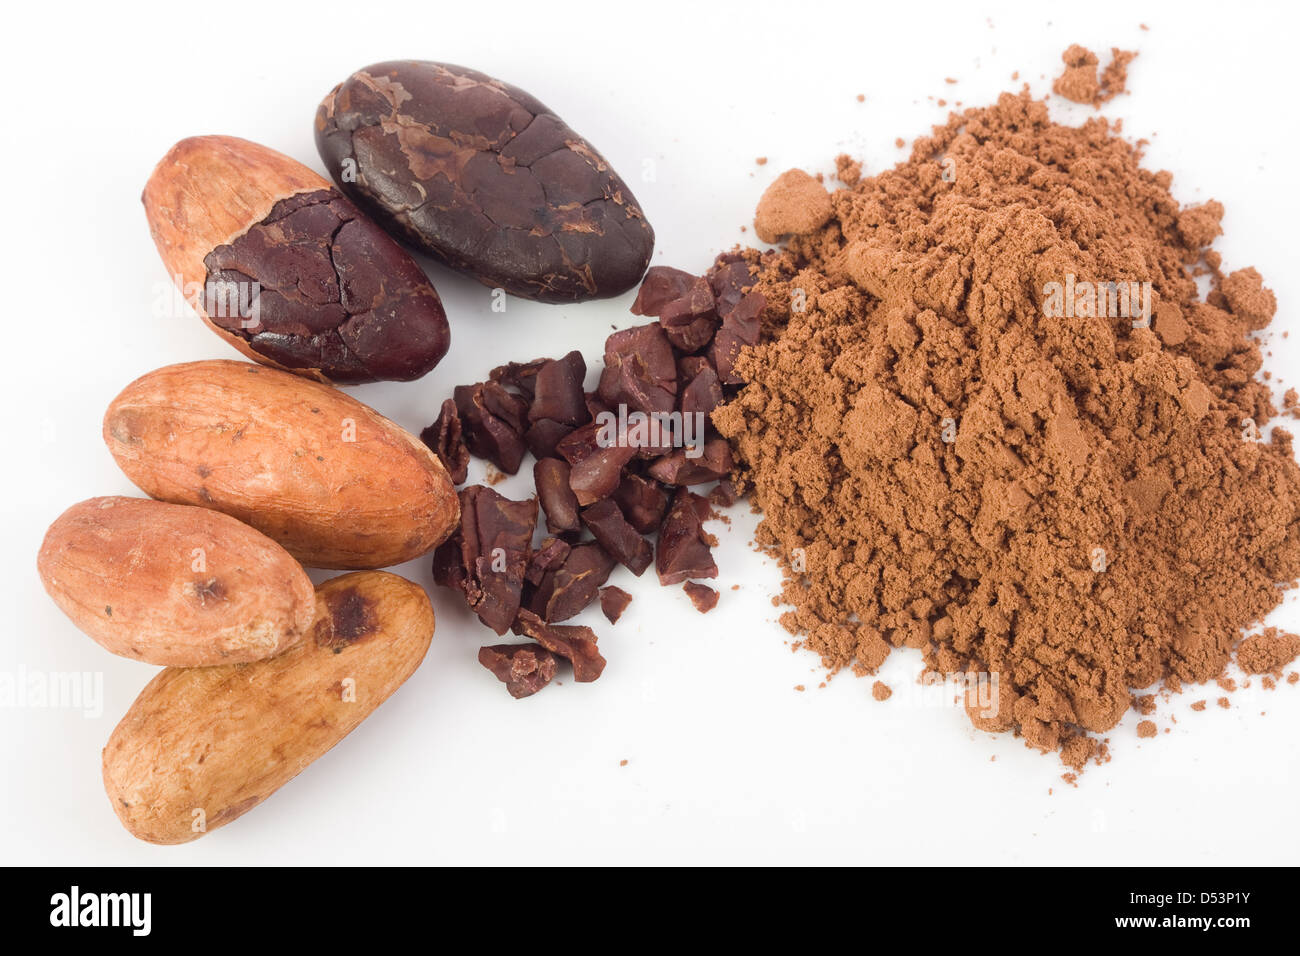 Cocoa beans with and without shell Stock Photo